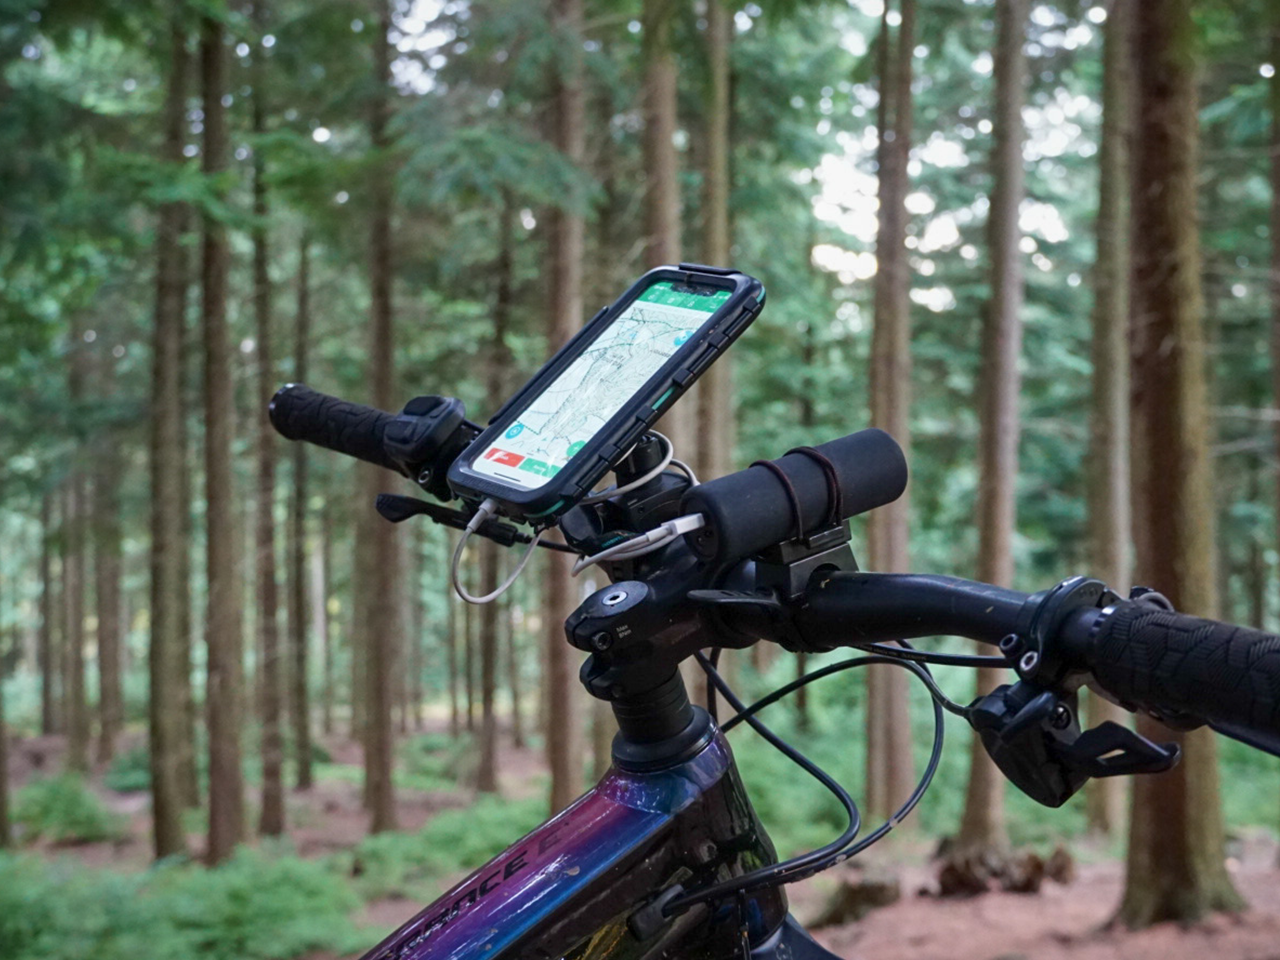 Durable Bike Mount Attachments with Tough Case for iPhone Pro Max